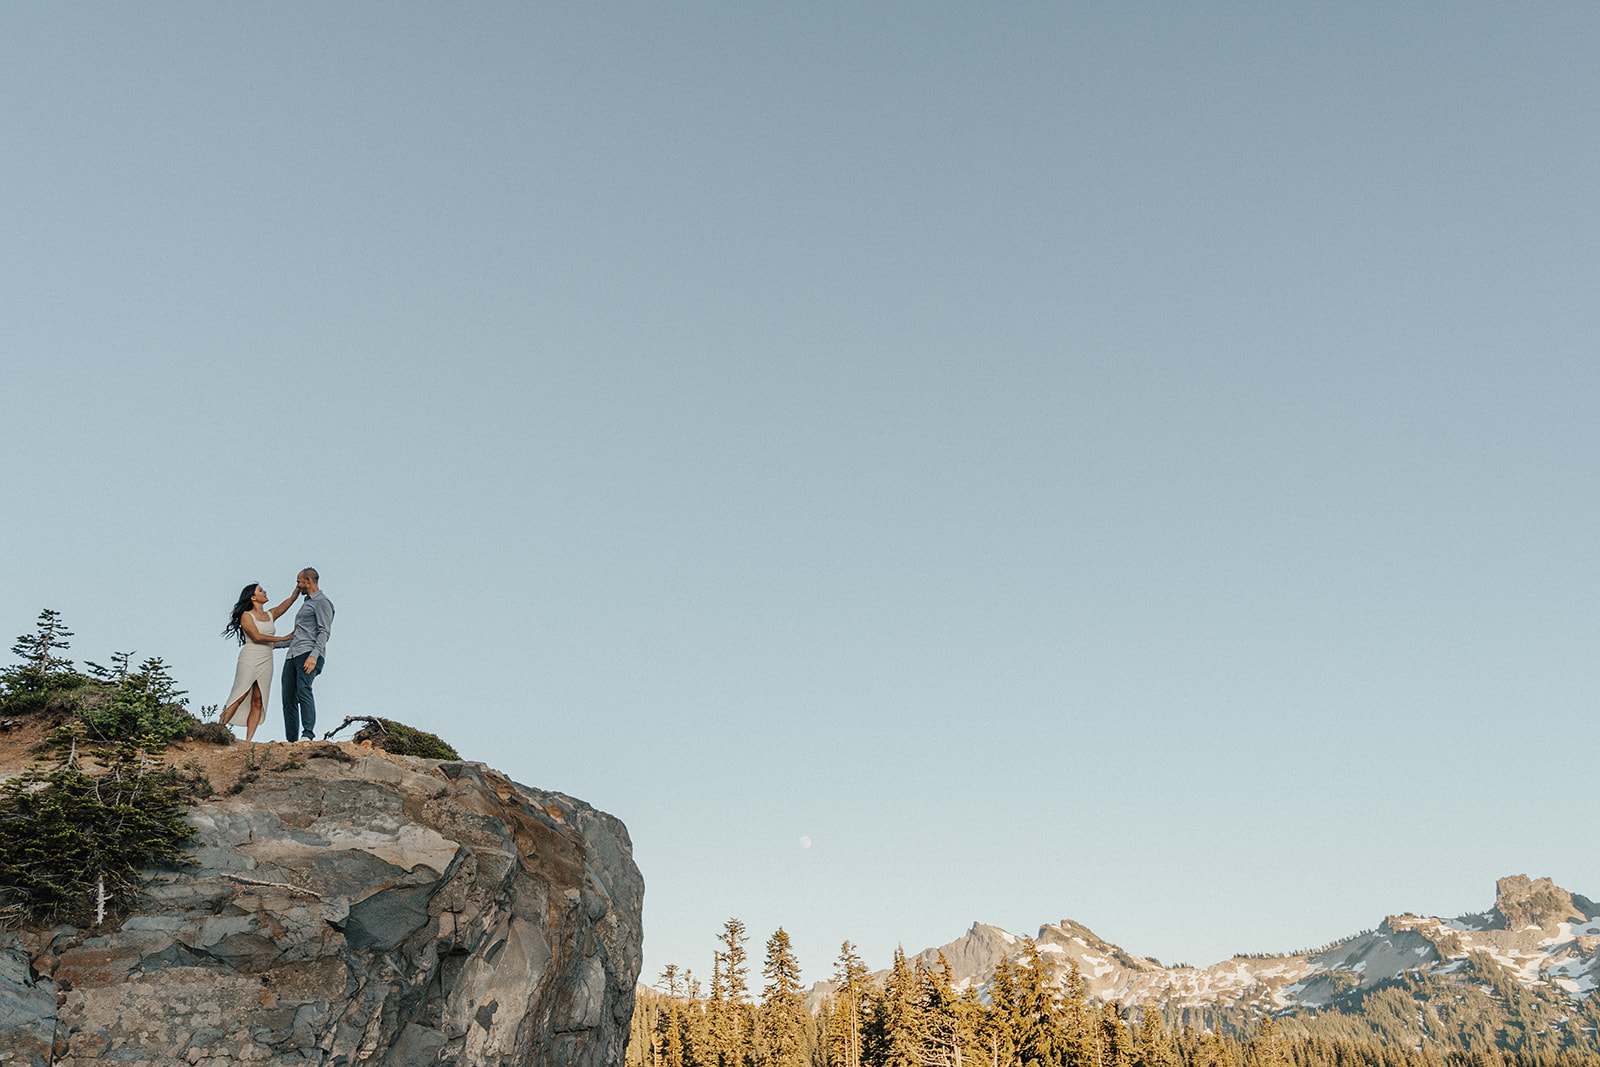 A couple at Mt Rainier photographed by Hallie Kathryn for their engagement photos